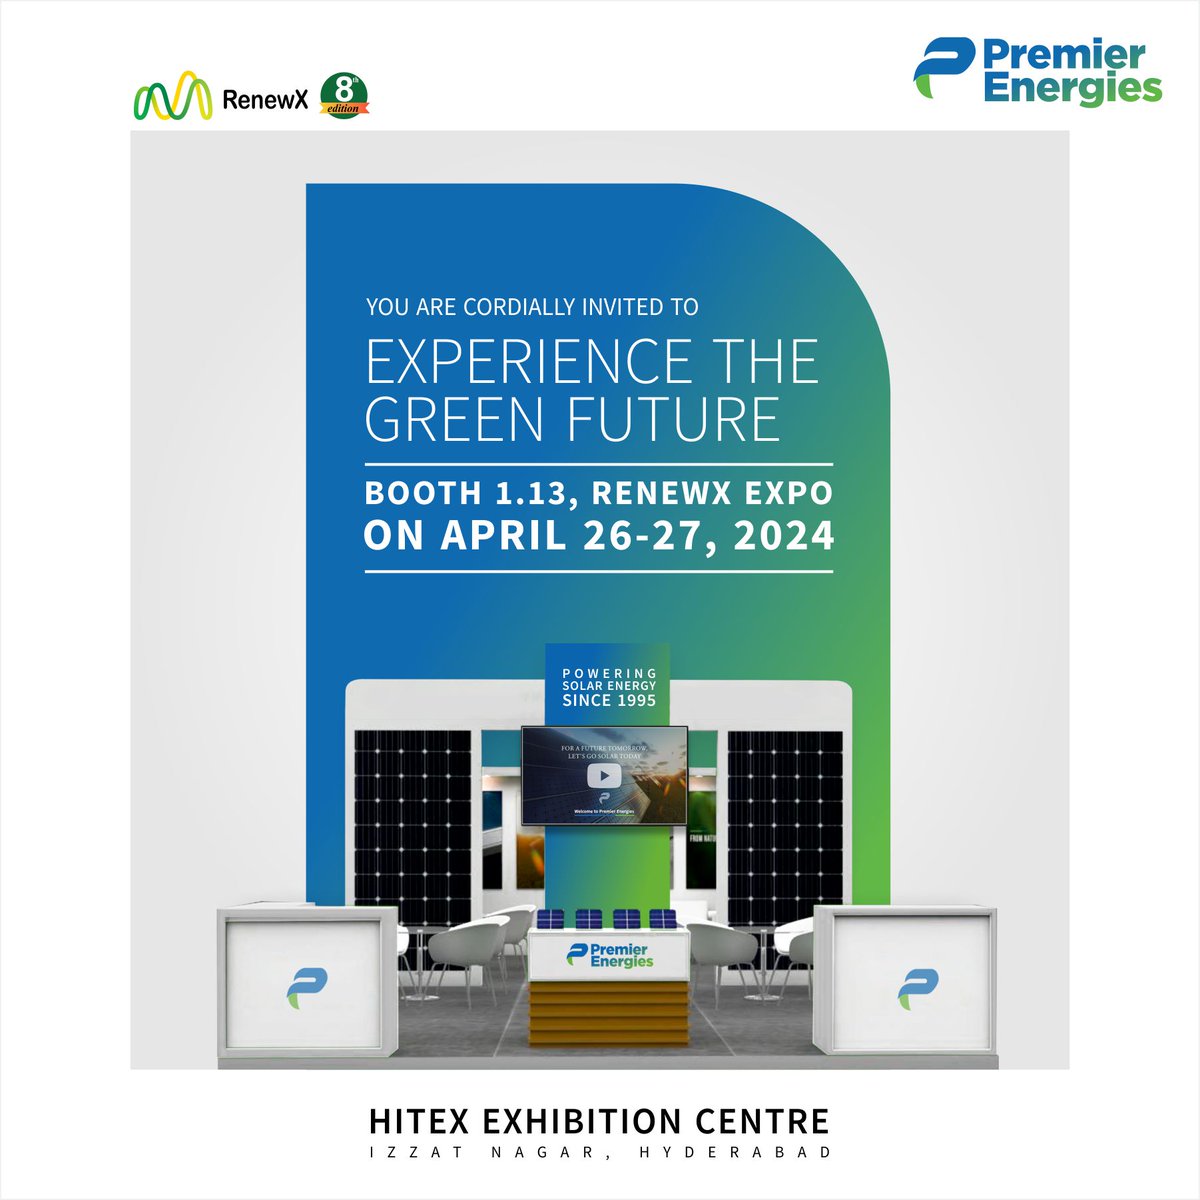 Innovation is in the air! Premier Energies is all set for the Renewx Expo 2024 in Hyderabad. Anticipation is high as we prepare to unveil avant-garde advancements and sustainable solutions to drive the future forward. We invite you to discover more at Booth No 1.13.
#LetsGoSolar